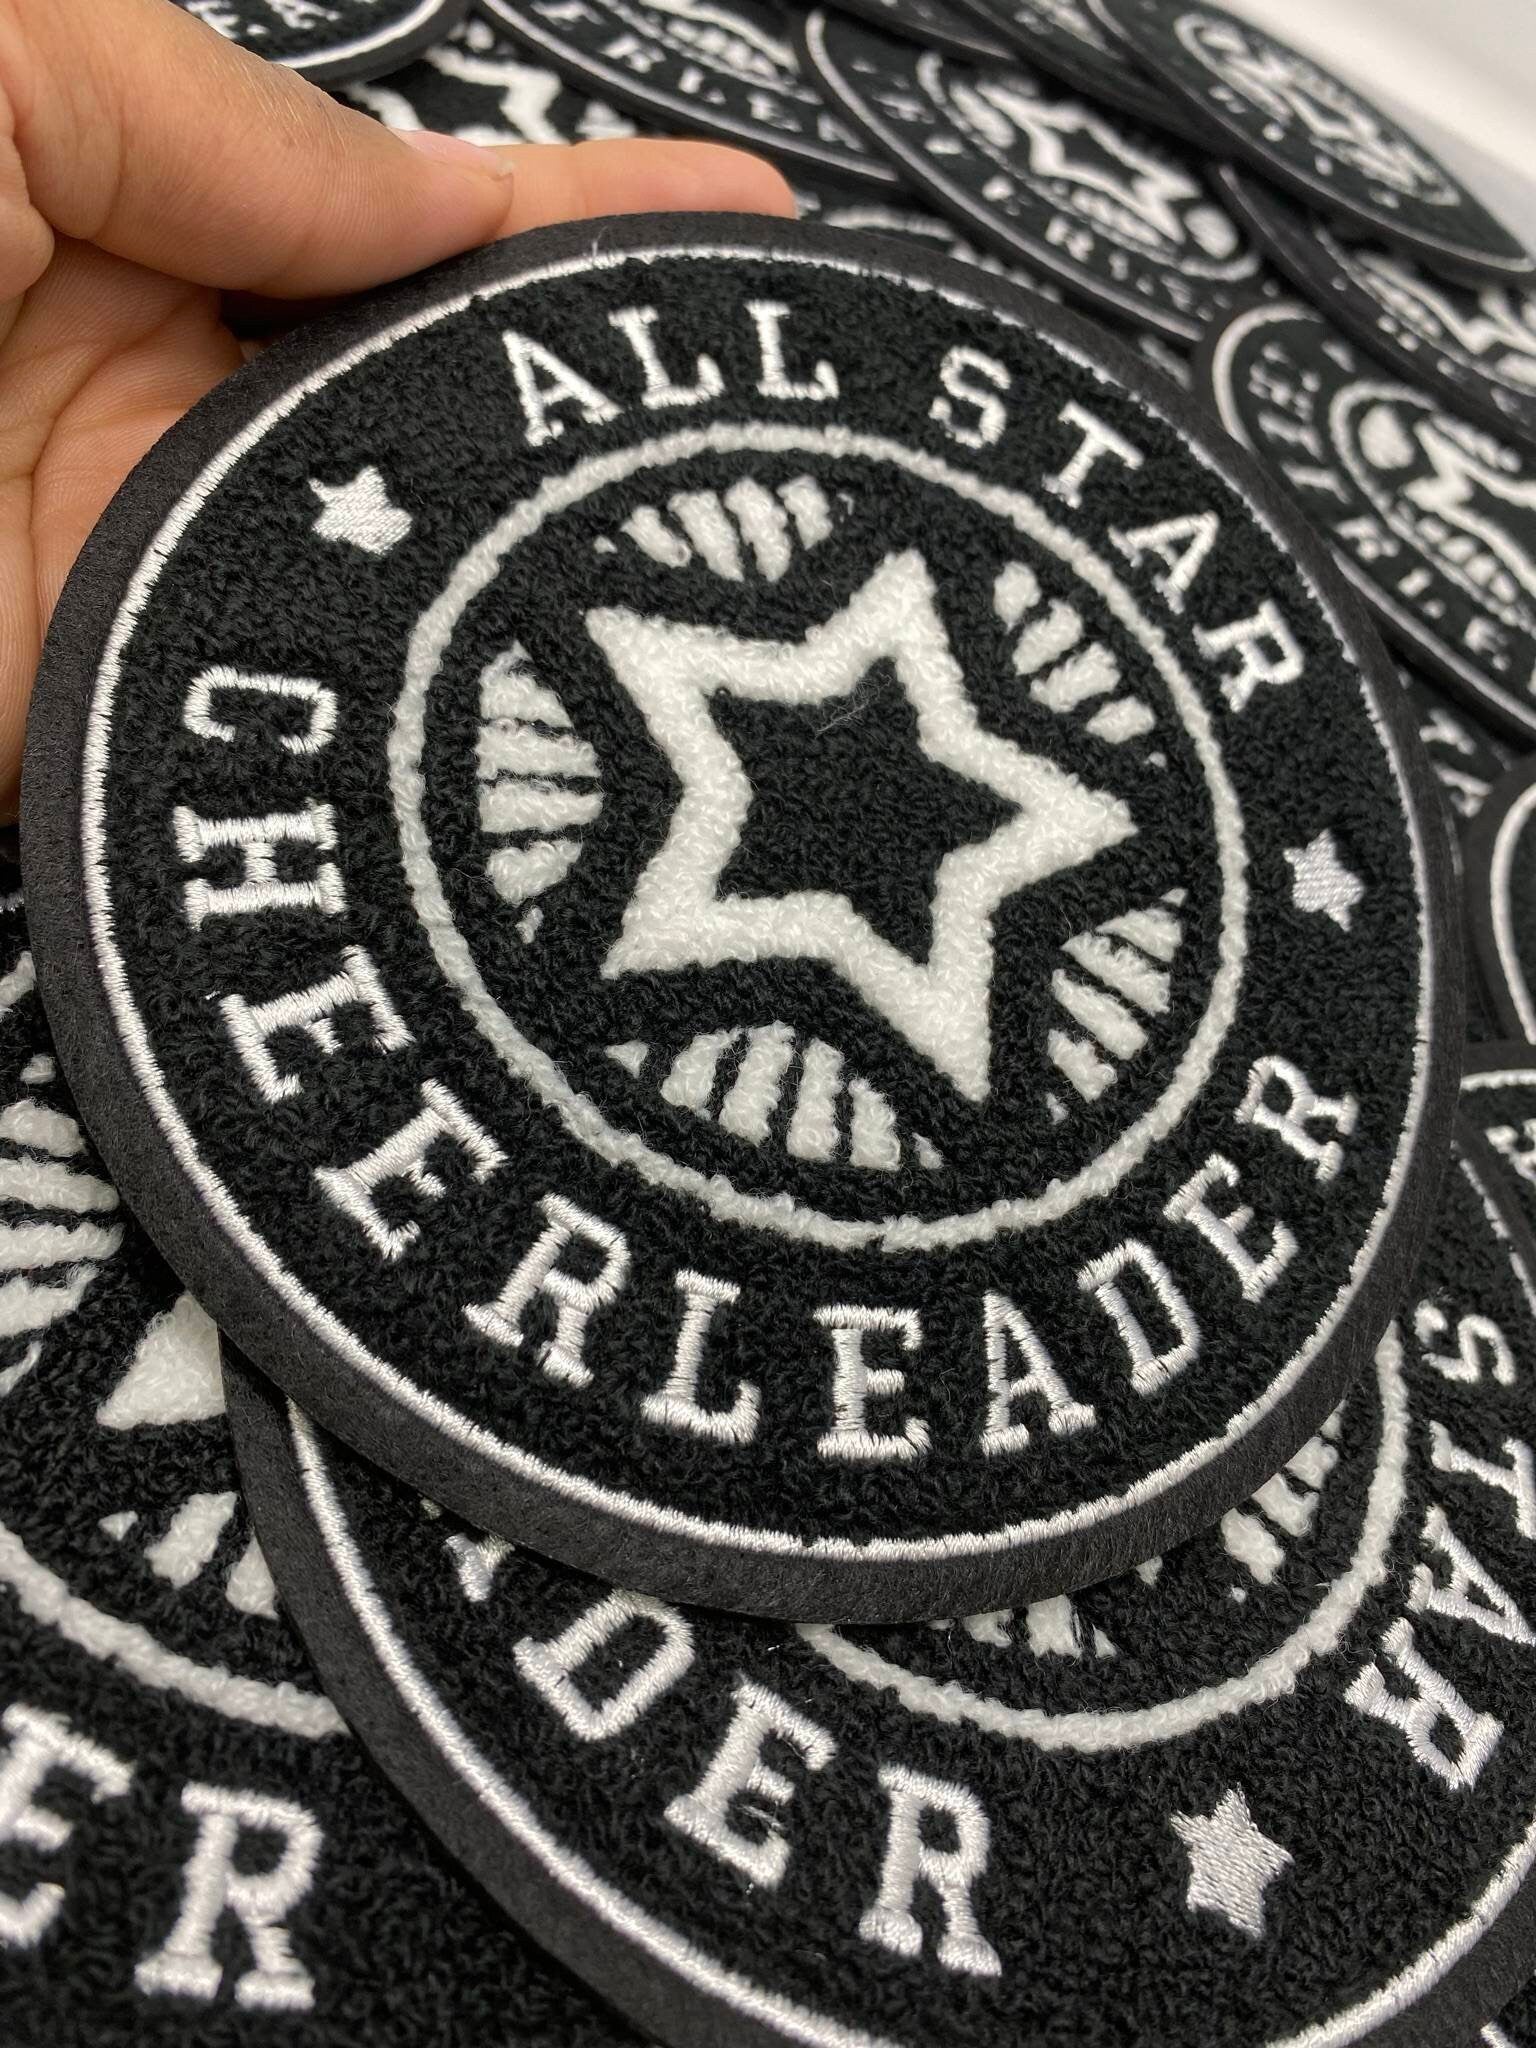 New Black Leather Yeah Star Number Embroidered Patches for Clothes Iron on  Clothes Jacket Shoes Appliques